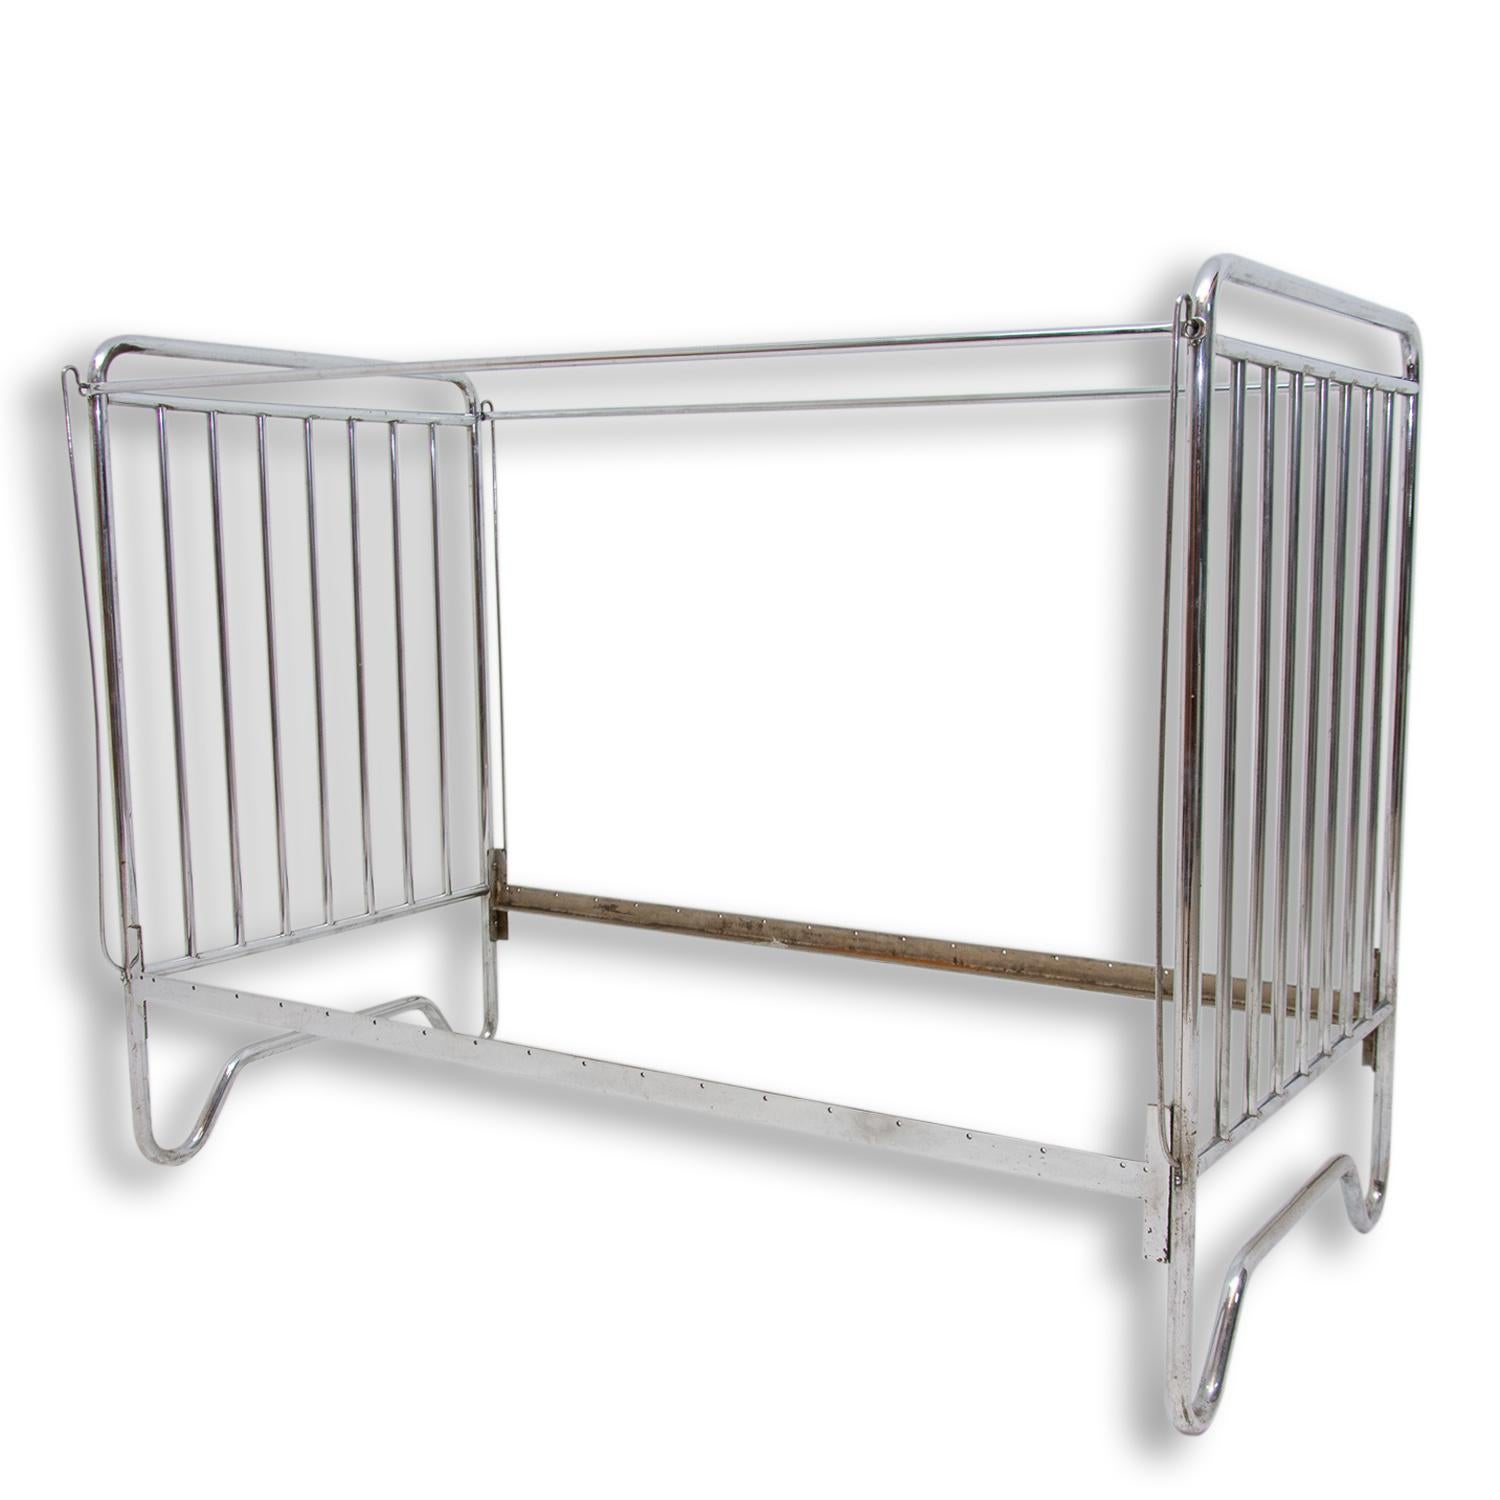 Chromium Plated Childern Bed, Bauhaus Period, 1930s For Sale 3